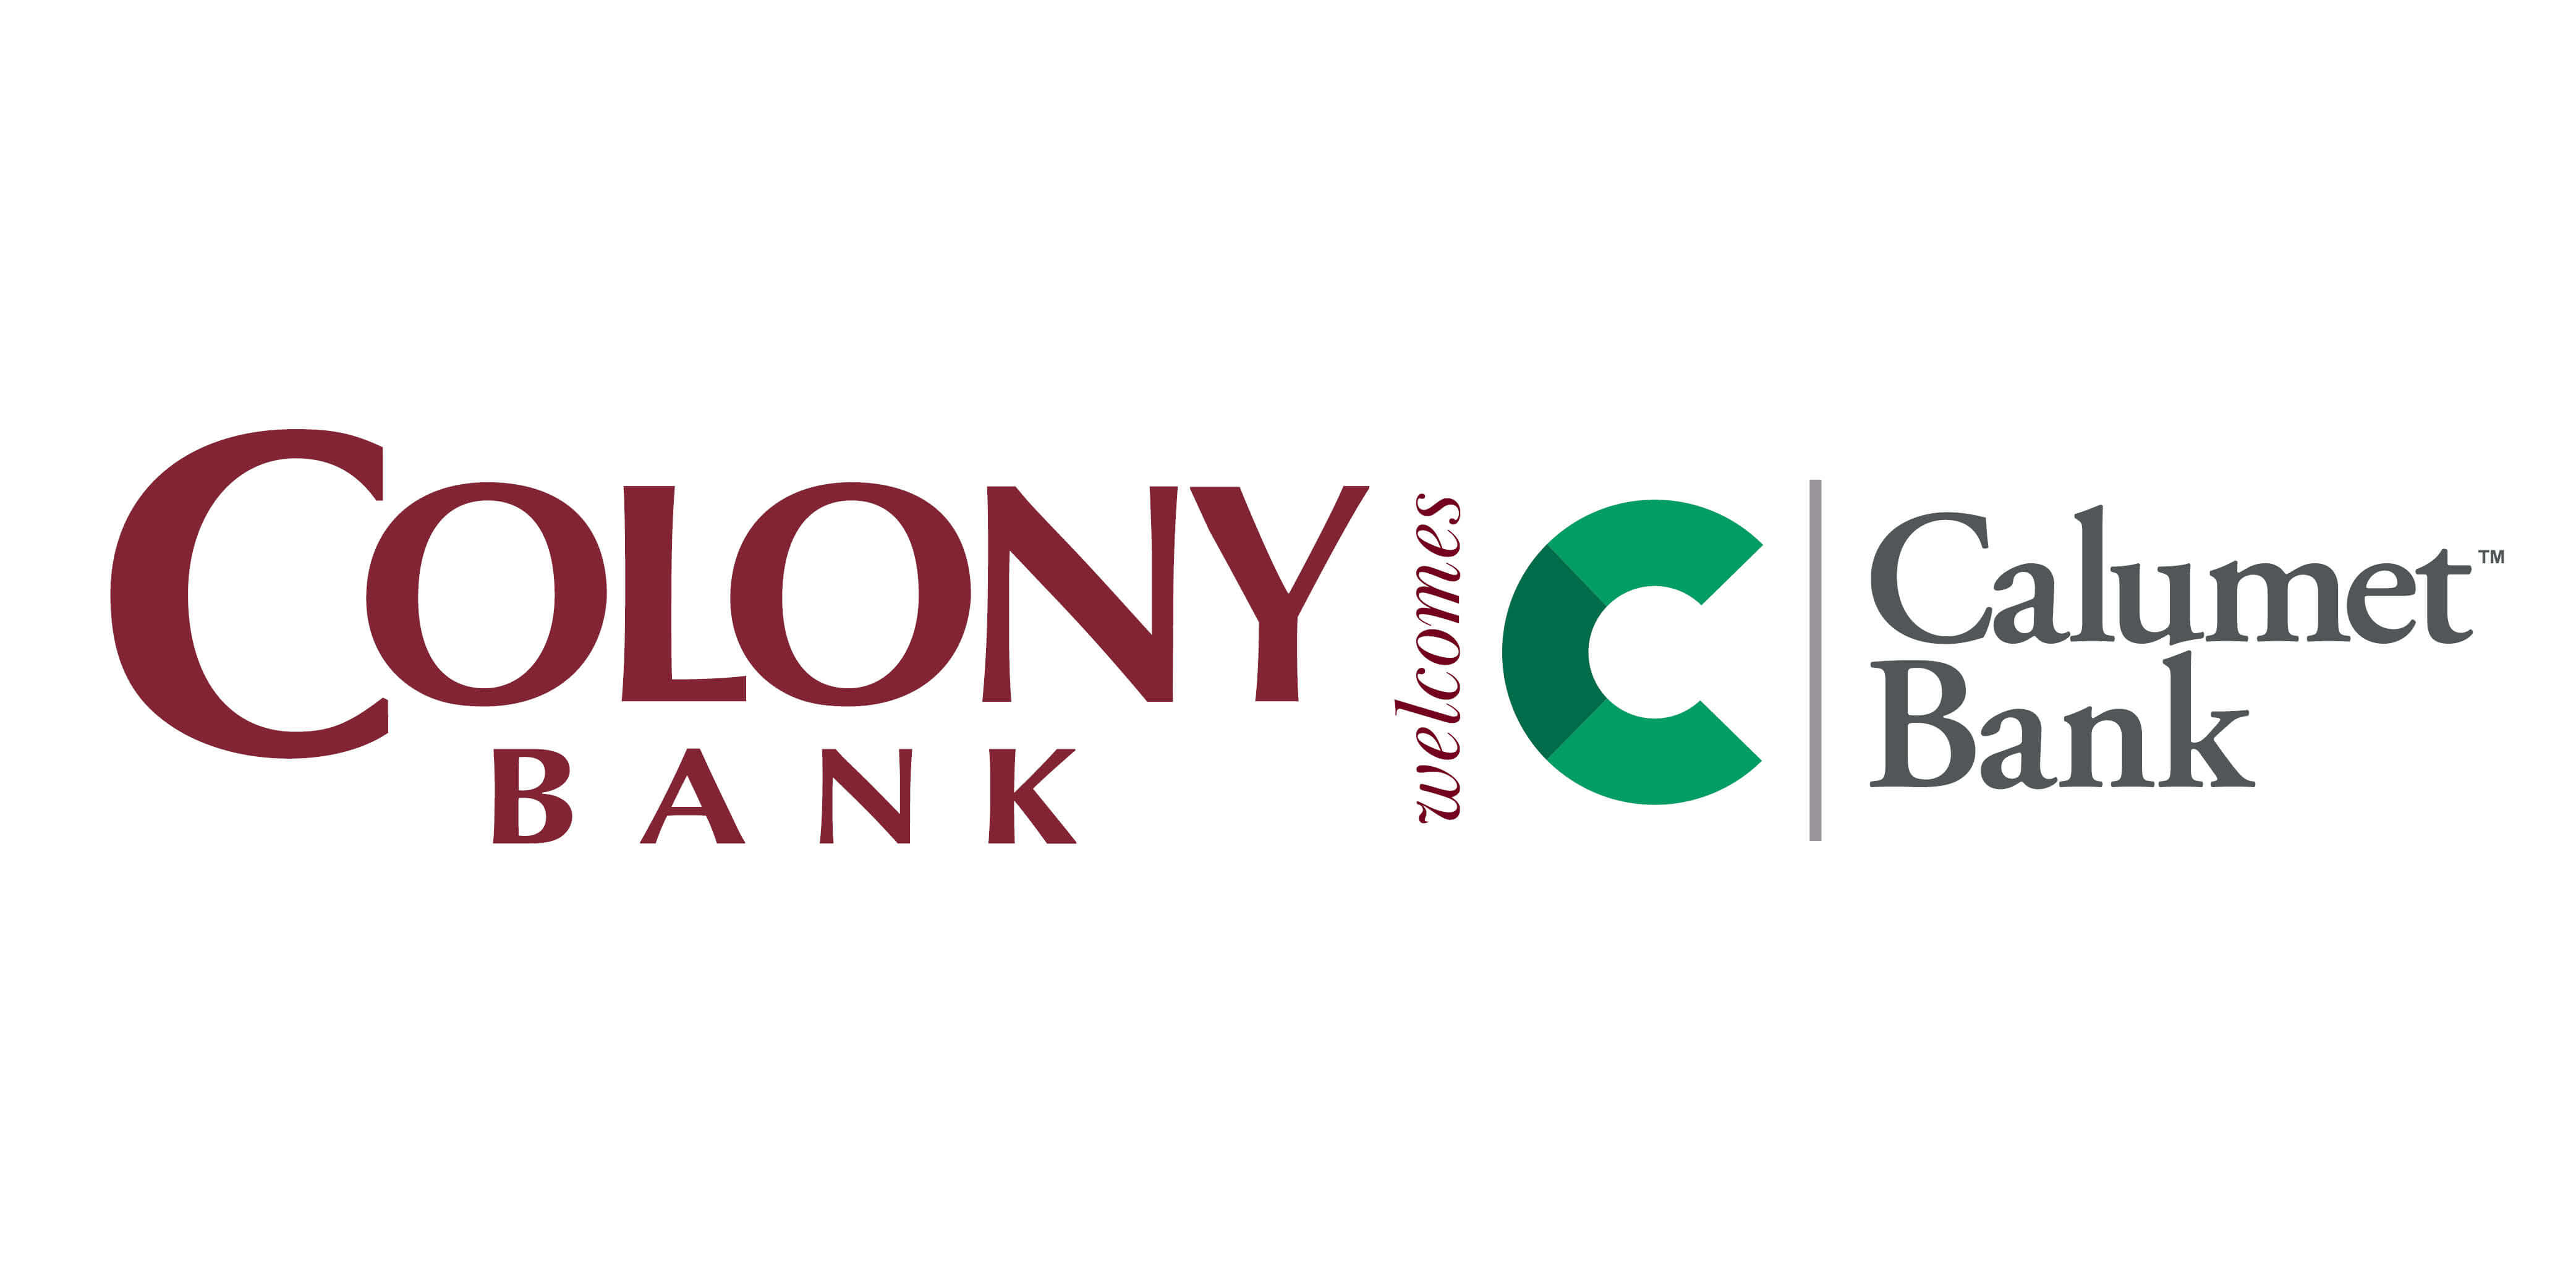 Calumet Logo - Understand the Merger with Colony Bank